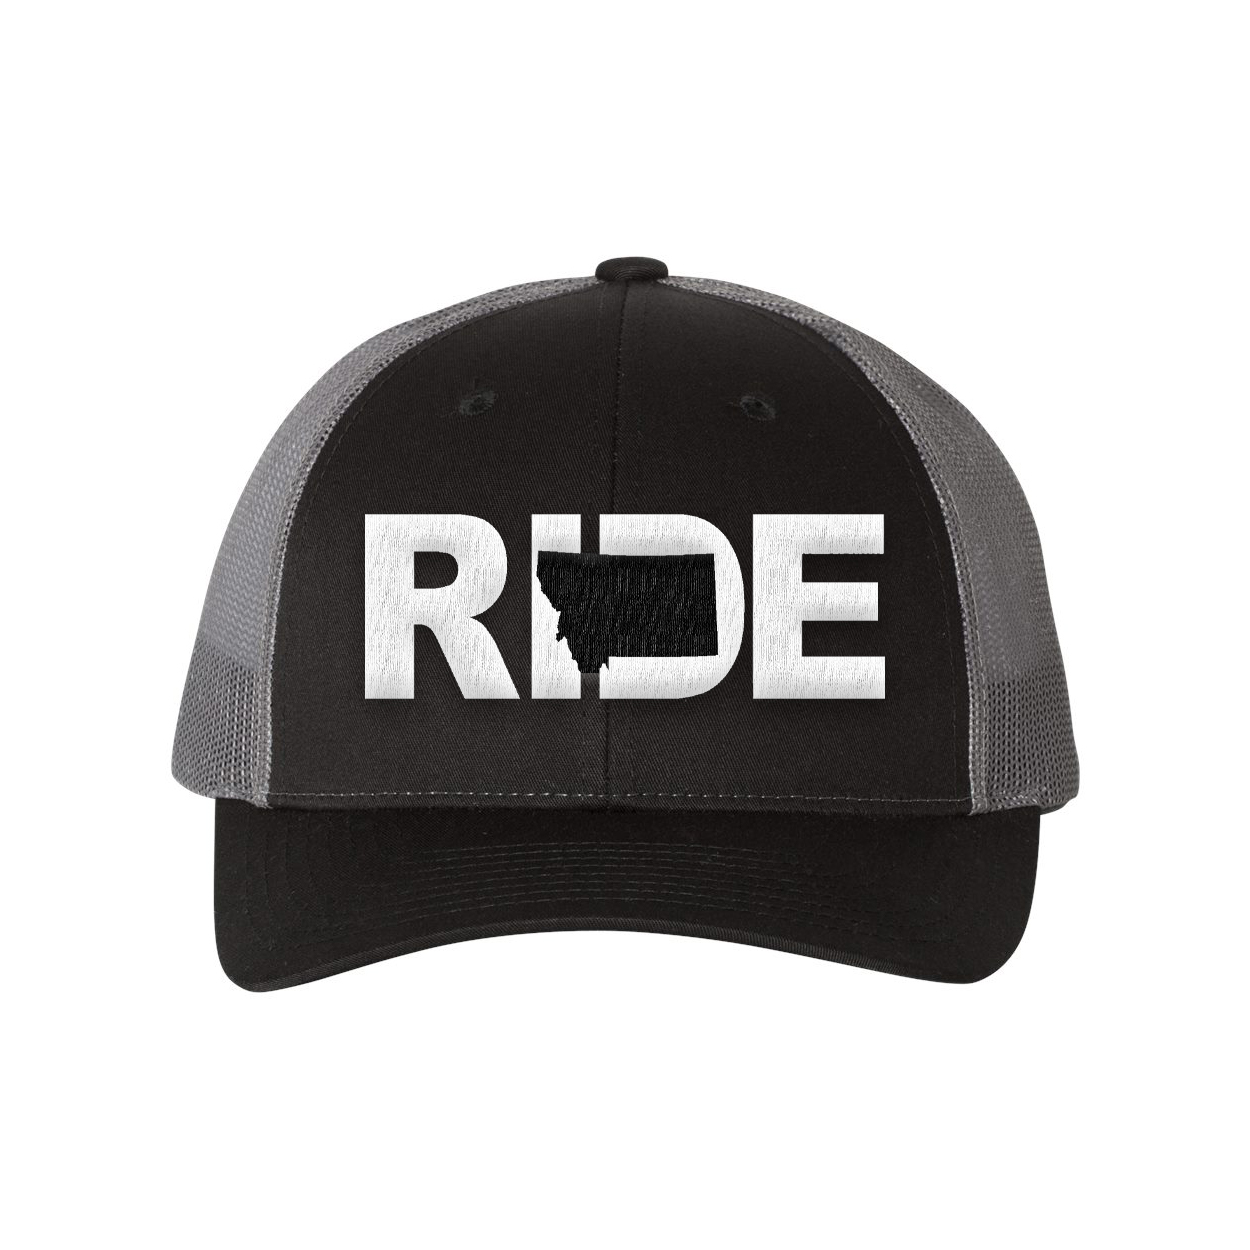 Ride Montana Classic Pro 3D Puff Embroidered Snapback Trucker Hat Black/Gray